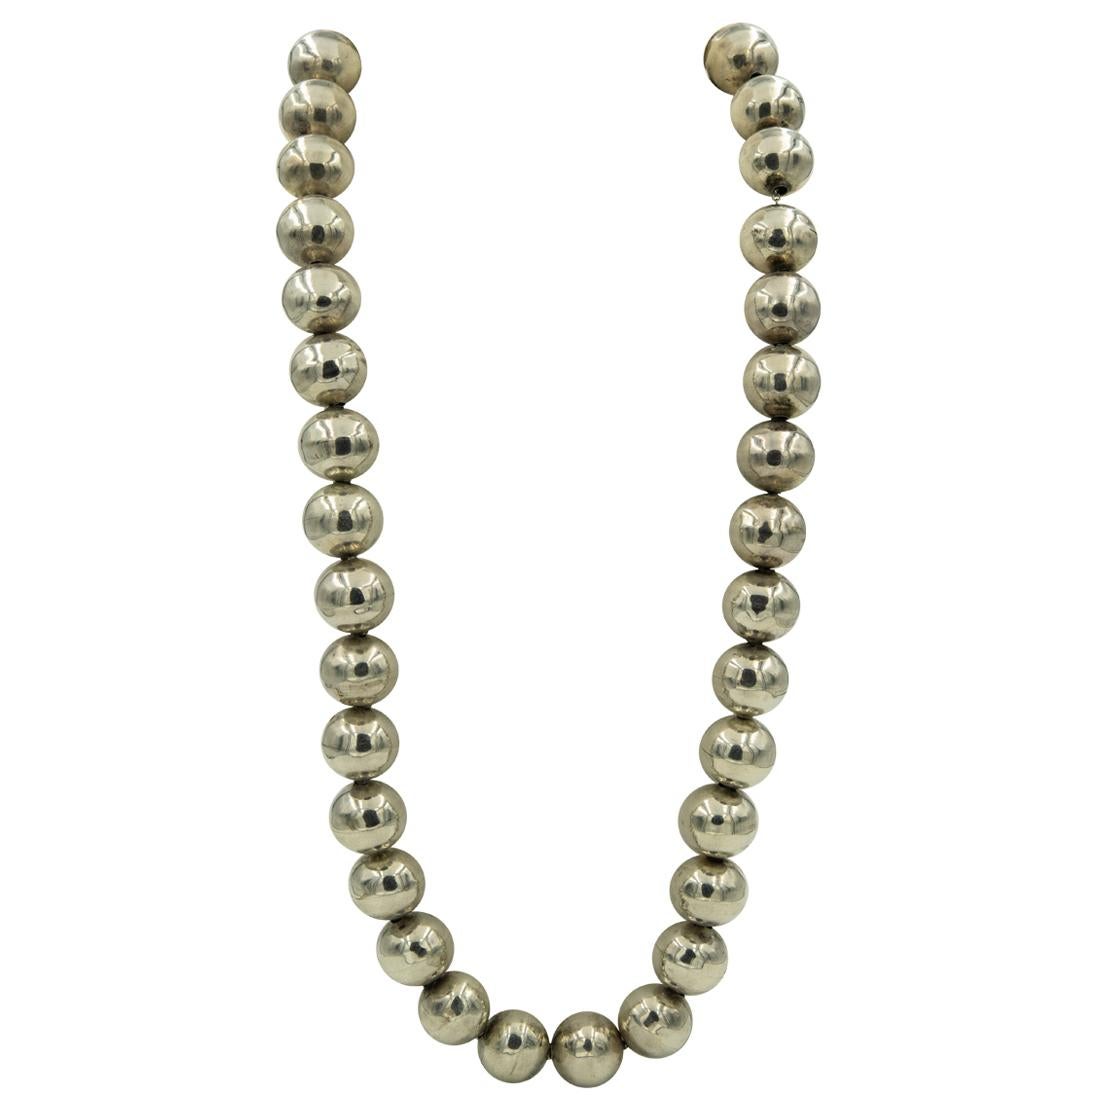 1970s Long Sterling Silver Ball Bead Necklace